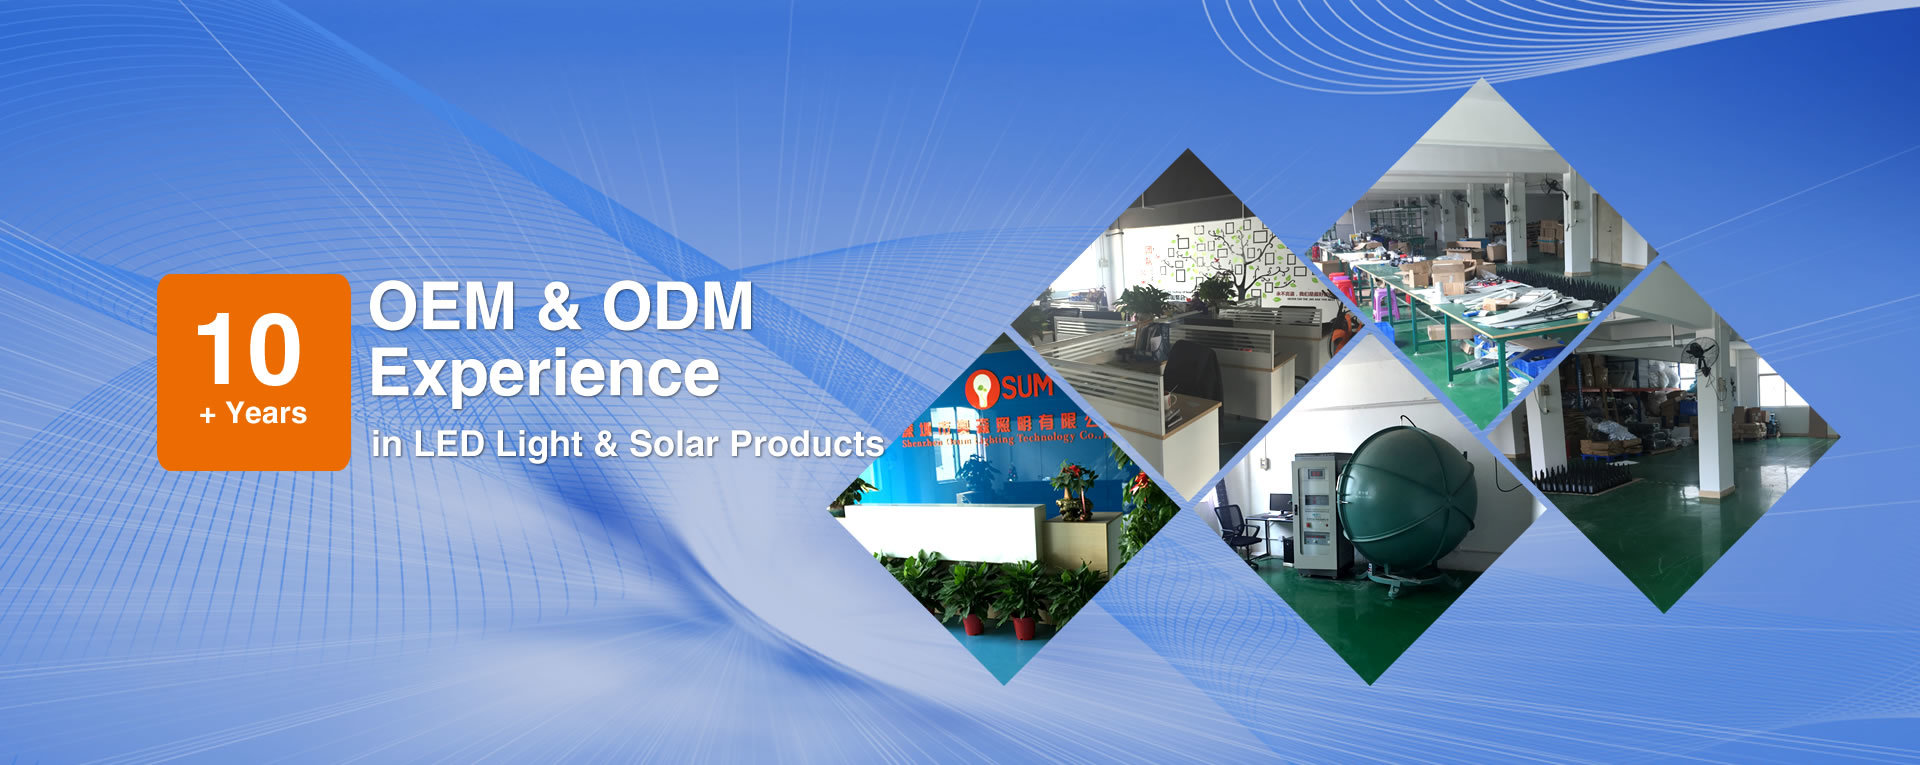 10+ Years OEM & ODM Experience in LED Light & Solar Products